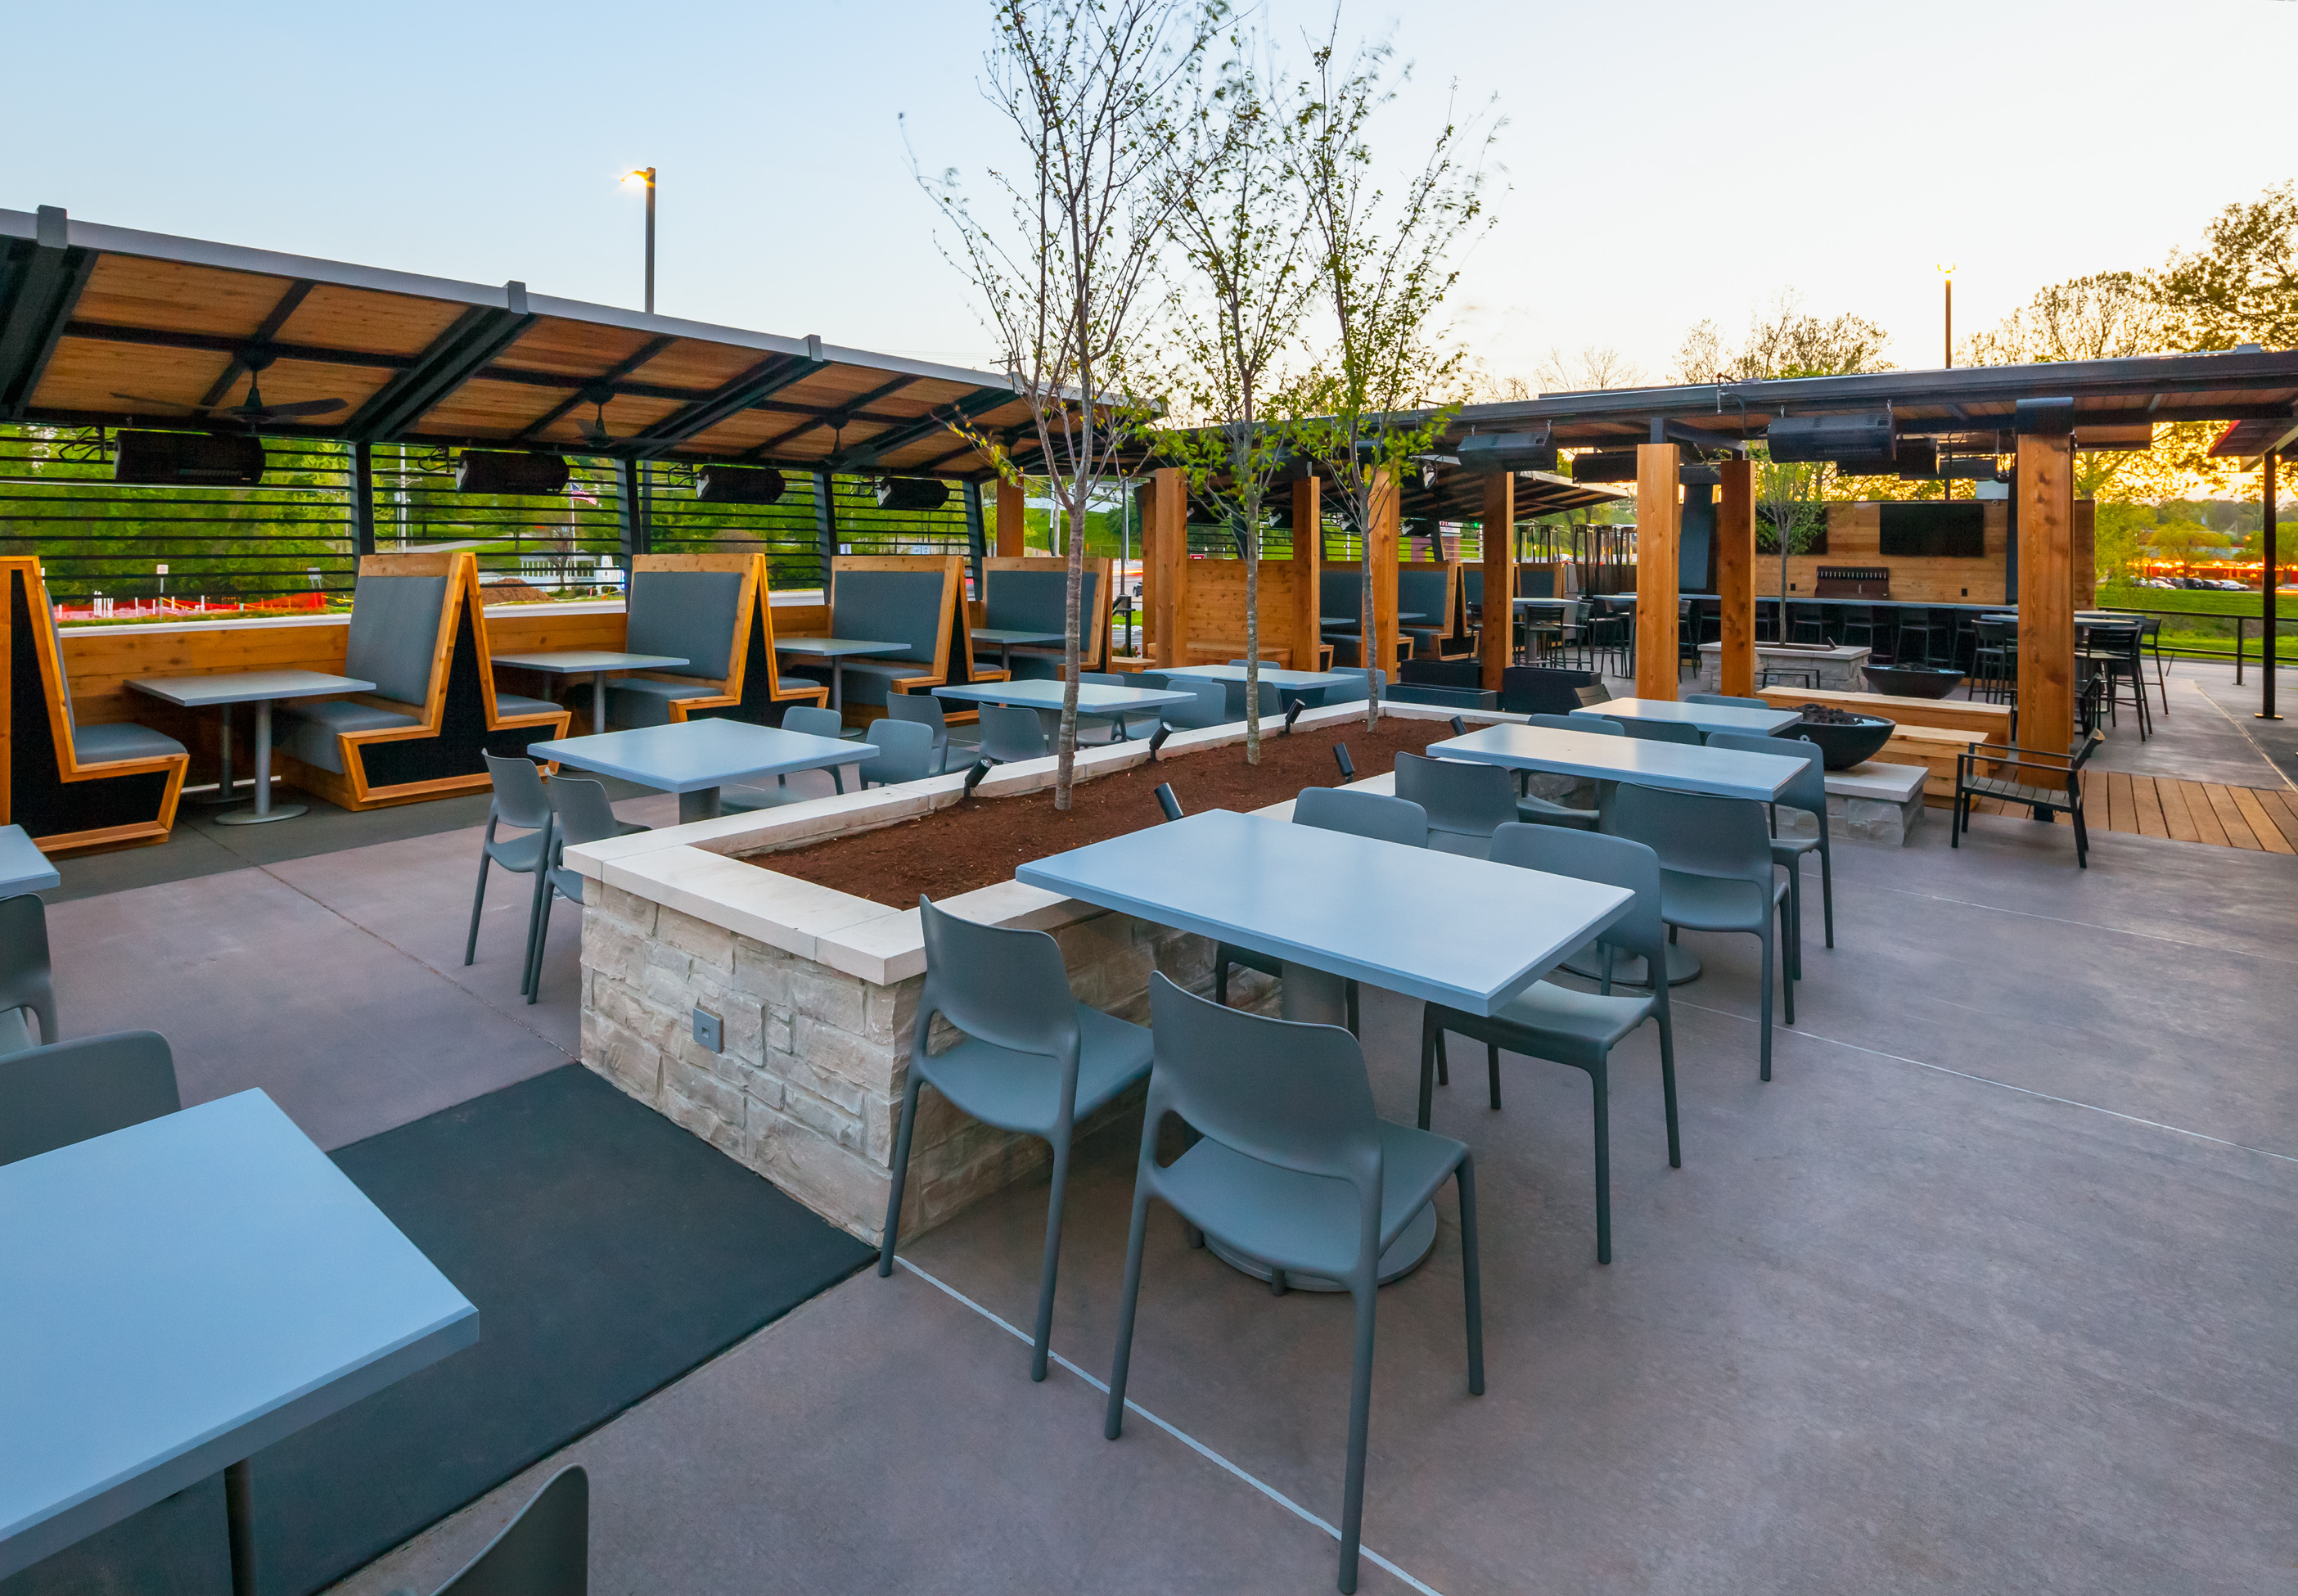 The patio features both ipe and cedar woods, and the concrete has two different colors to differentiate between seating areas. 